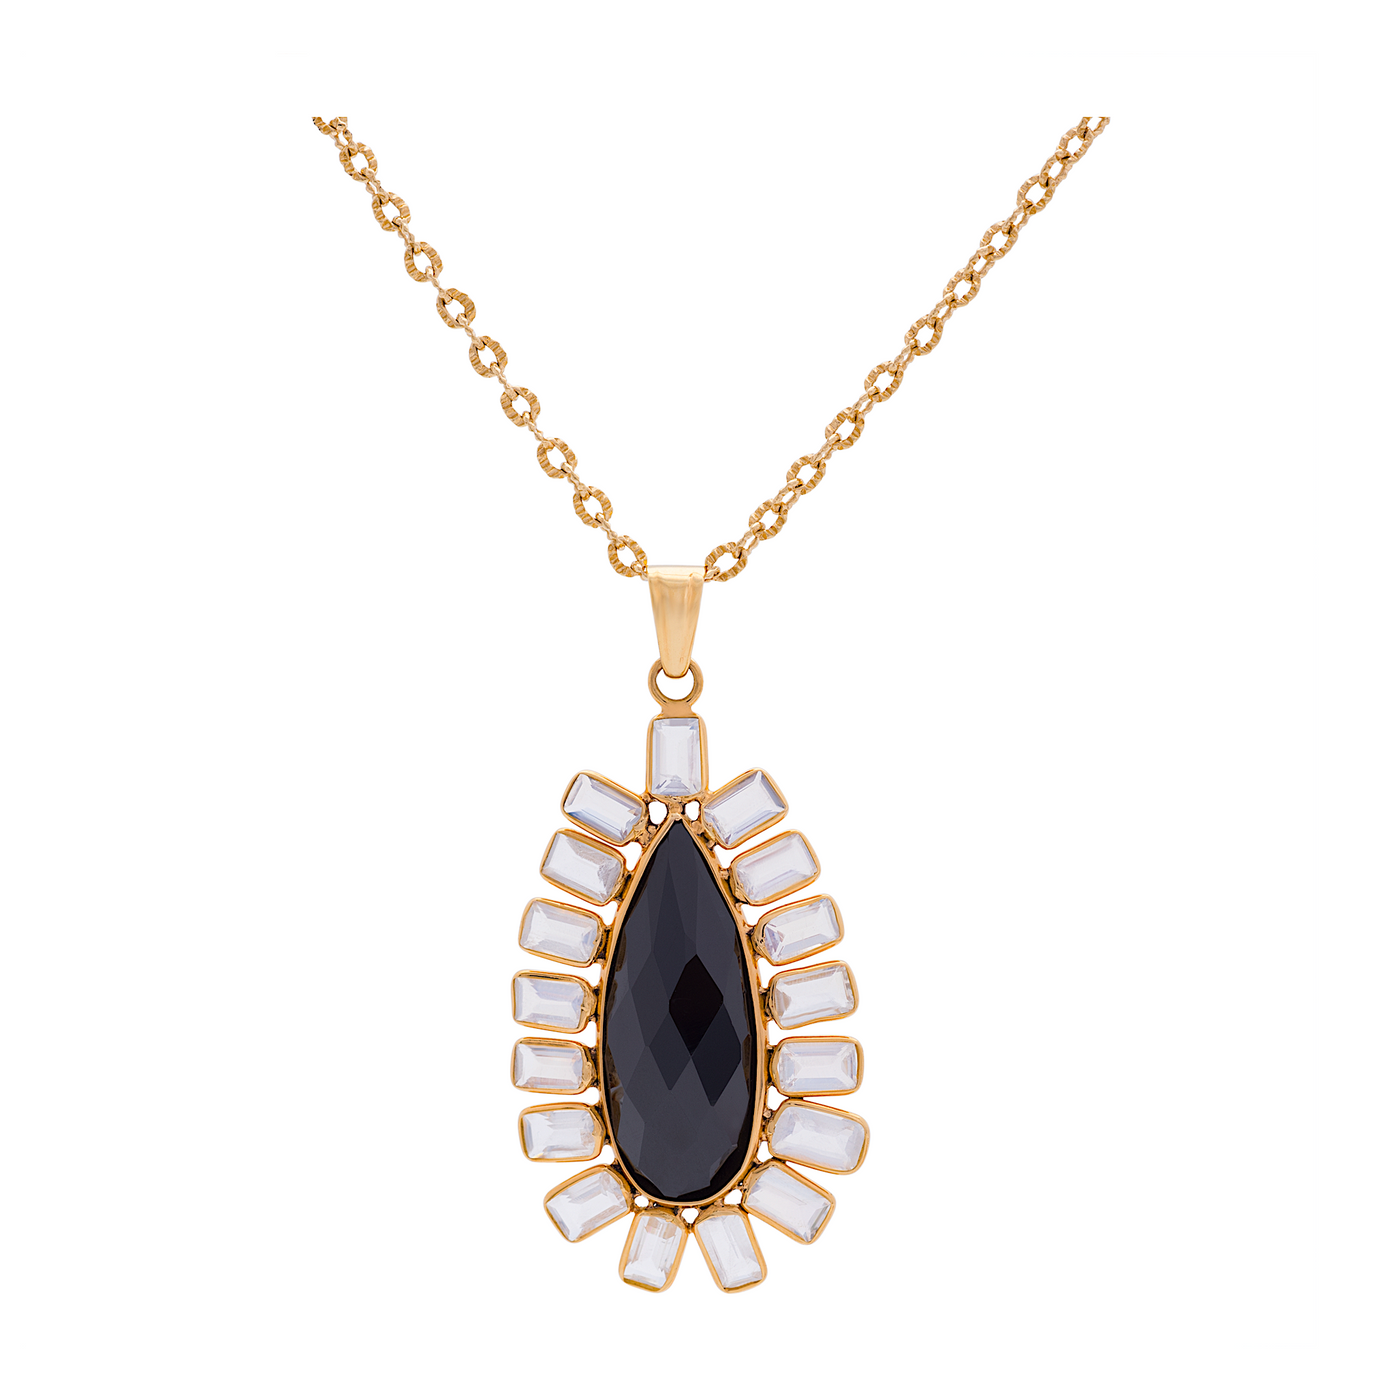 Black Spinal Rainbow Moonstone Pendant in 18k Yellow Gold with 20 Fancy Anchor Chain